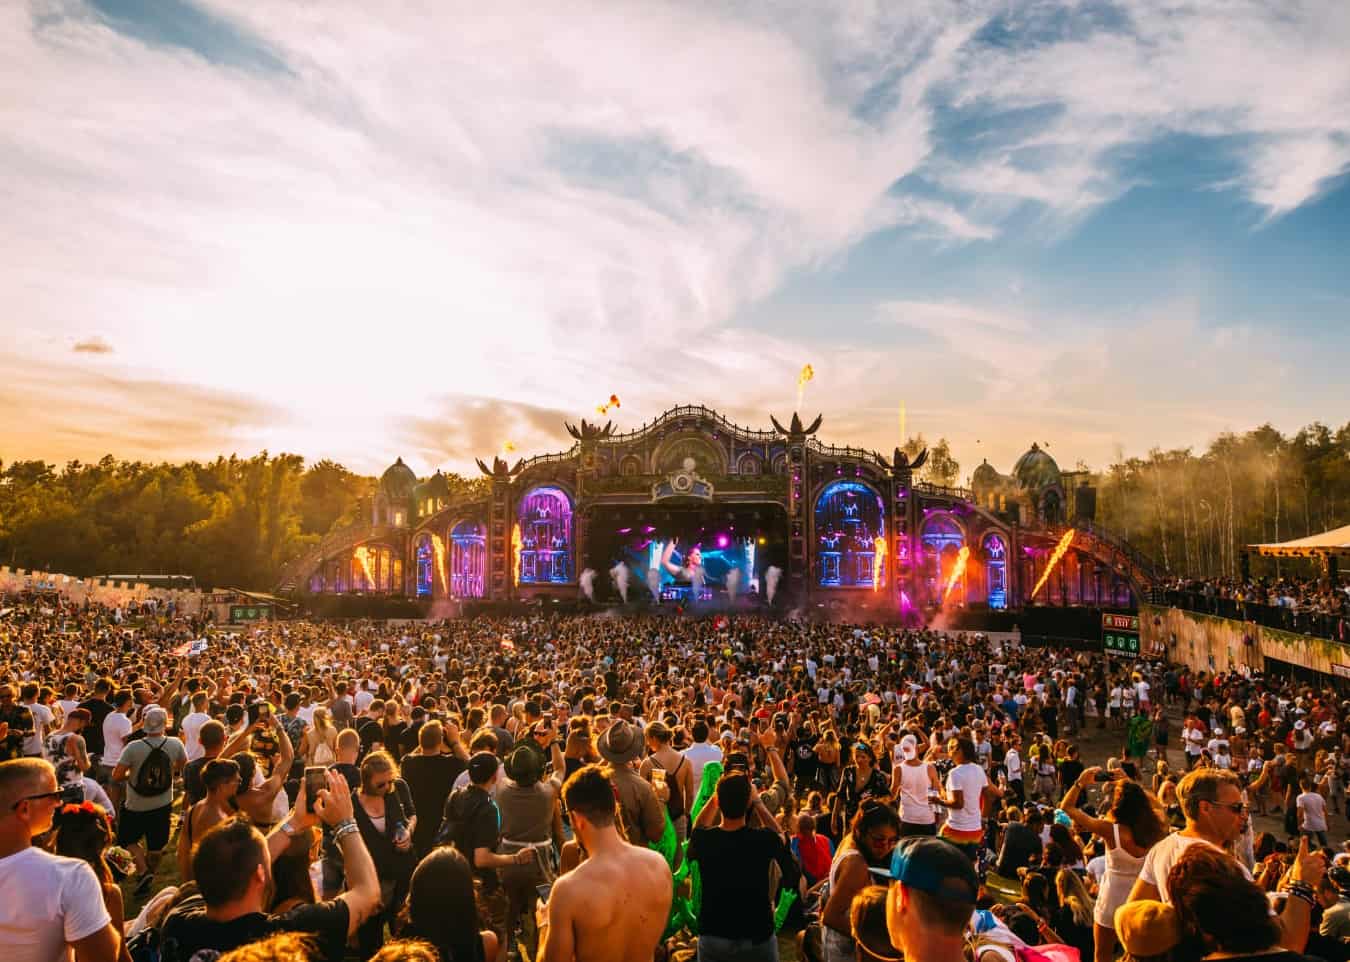 Top music festivals to attend this summer across the globe in 2022